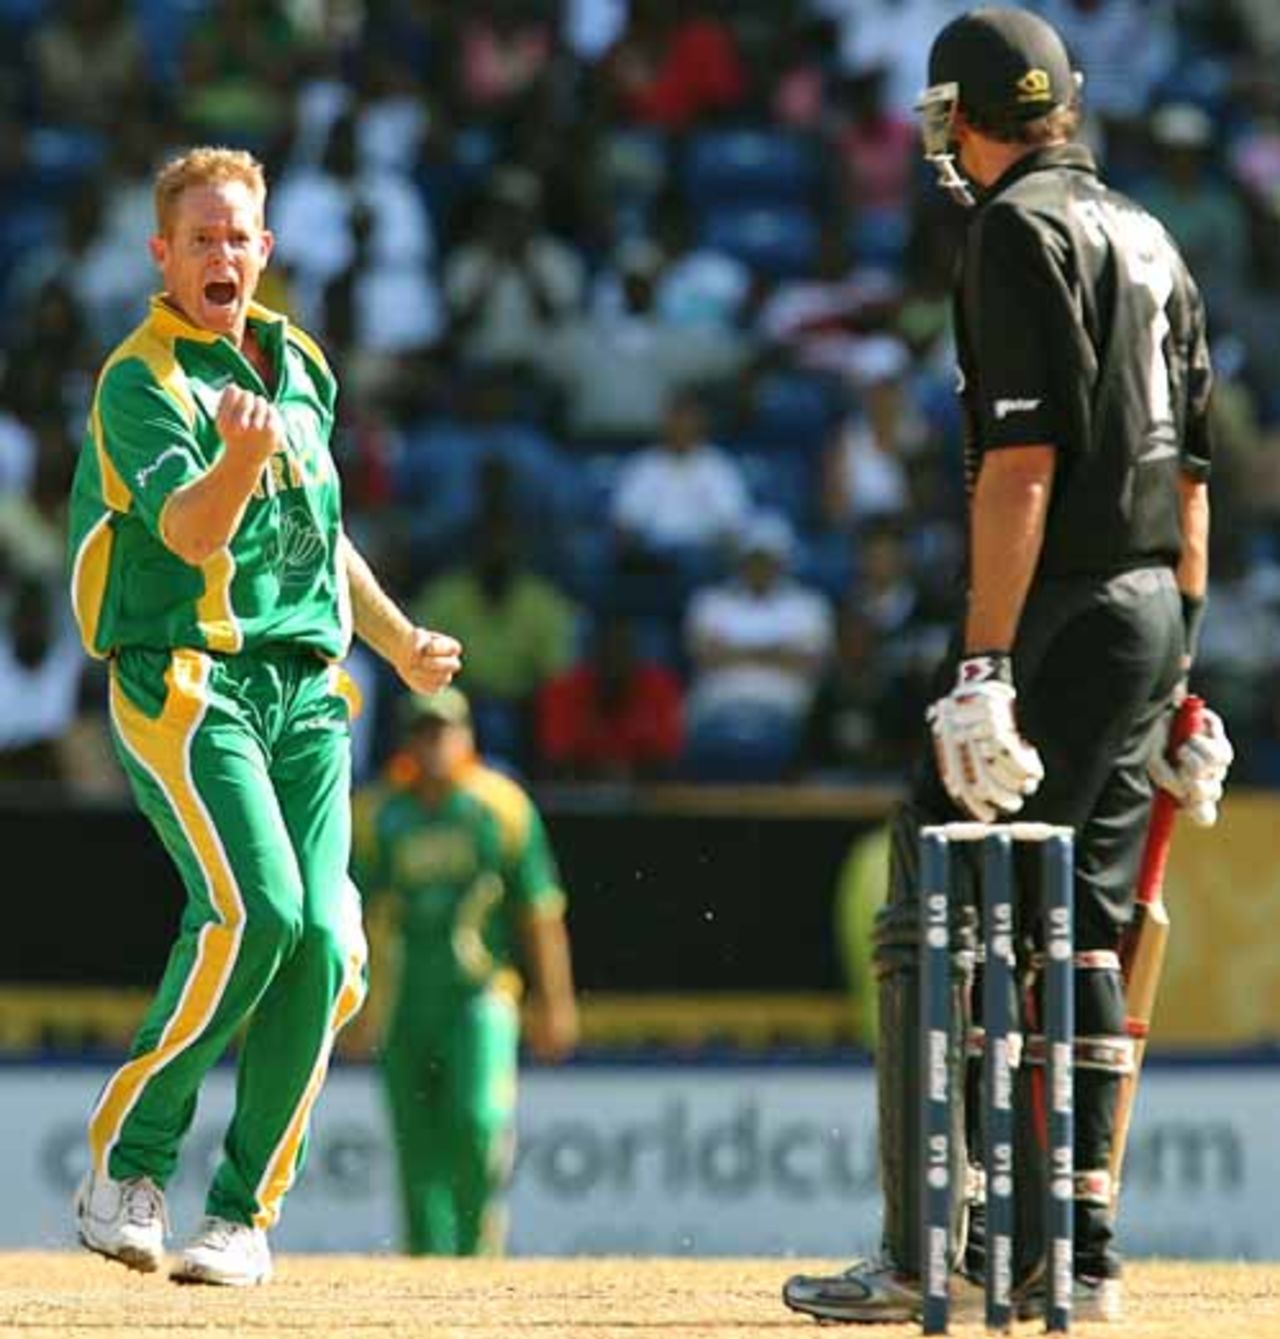 Shaun Pollock celebrates the wicket of Stephen Fleming, New Zealand v South Africa, Super Eights, Grenada, April 14, 2007